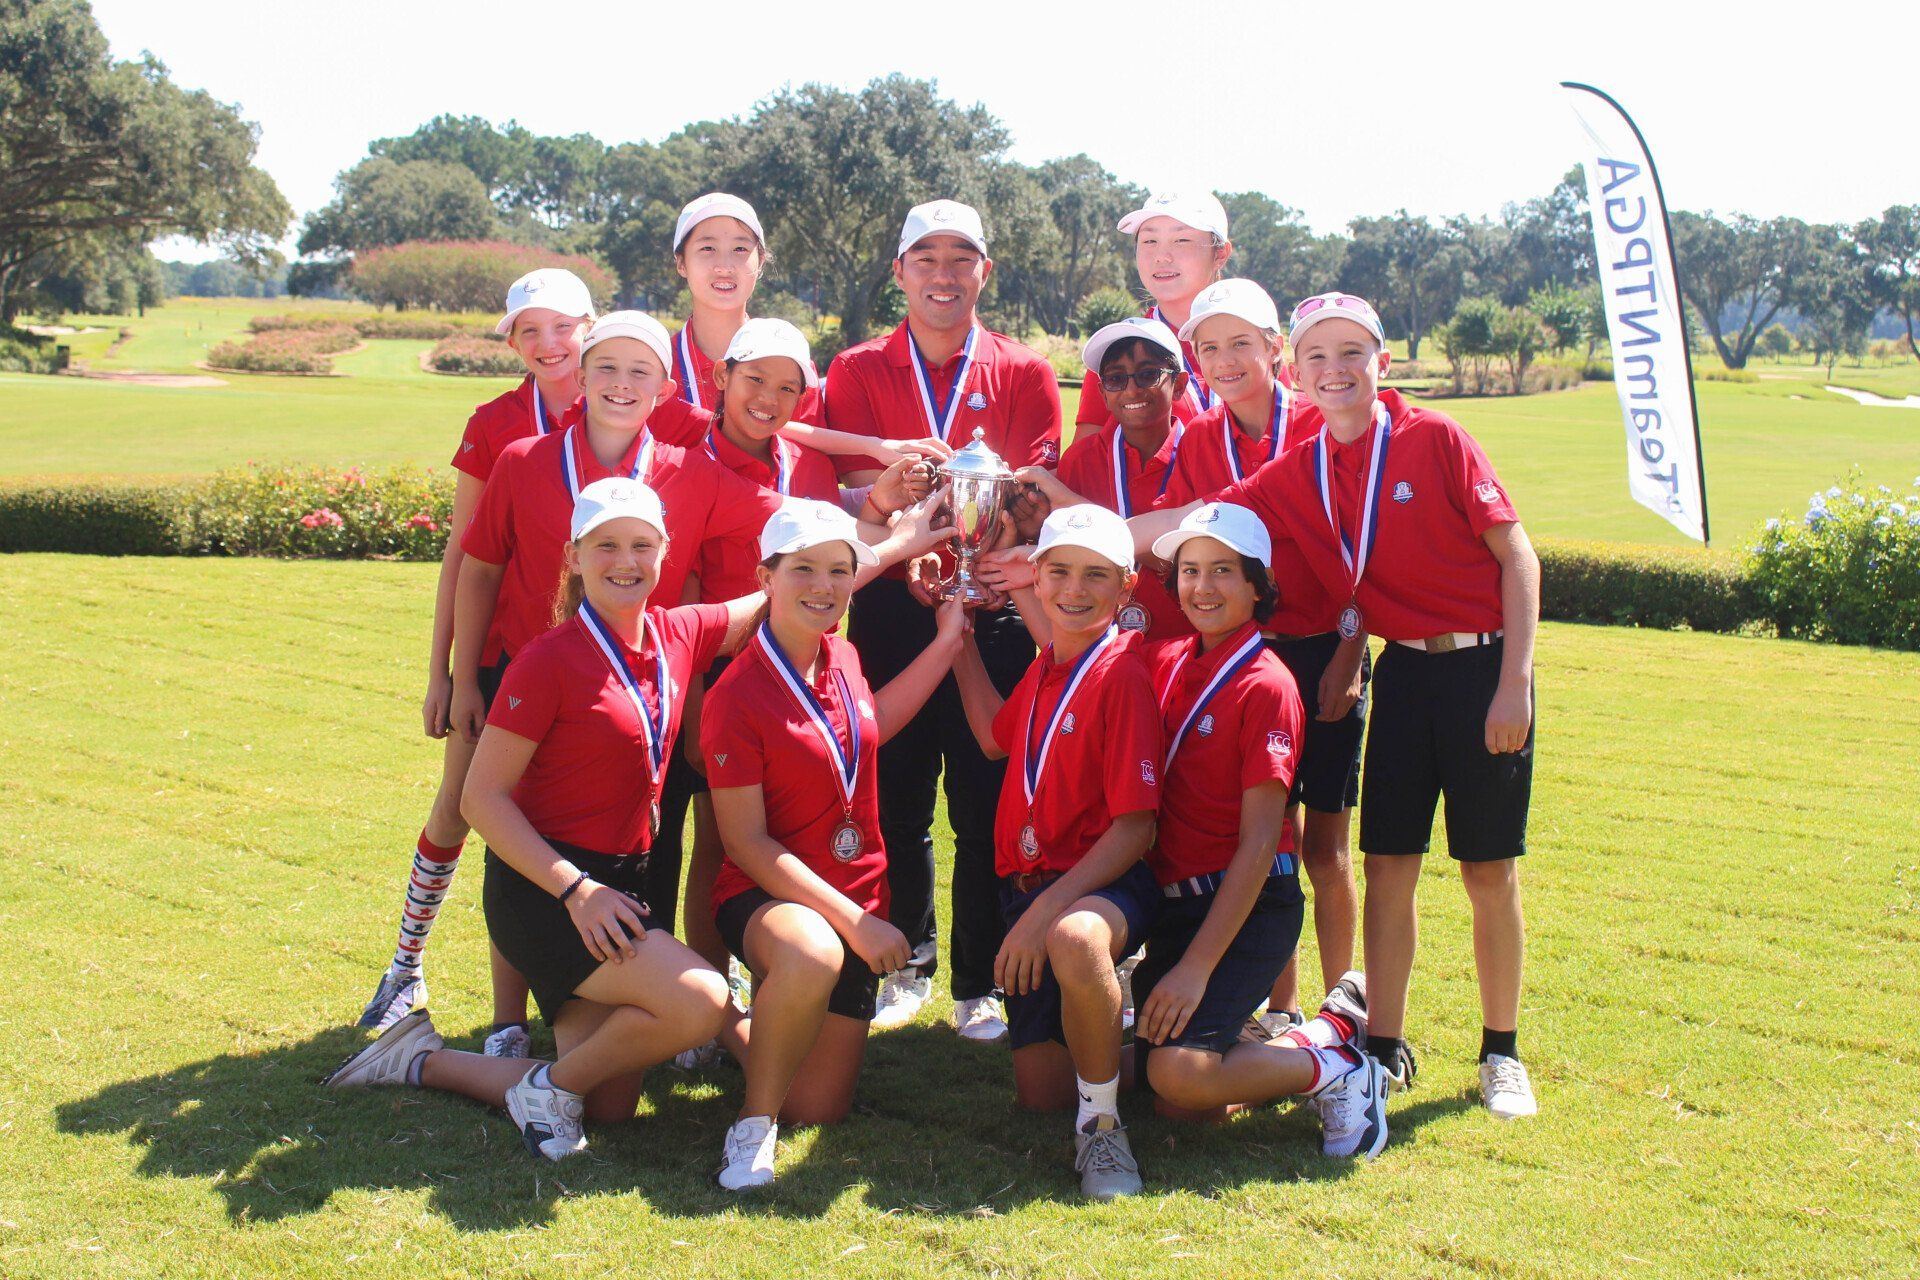 Southern Texas PGA wins the Cup at the 10th Annual Texas Junior Cup Matches